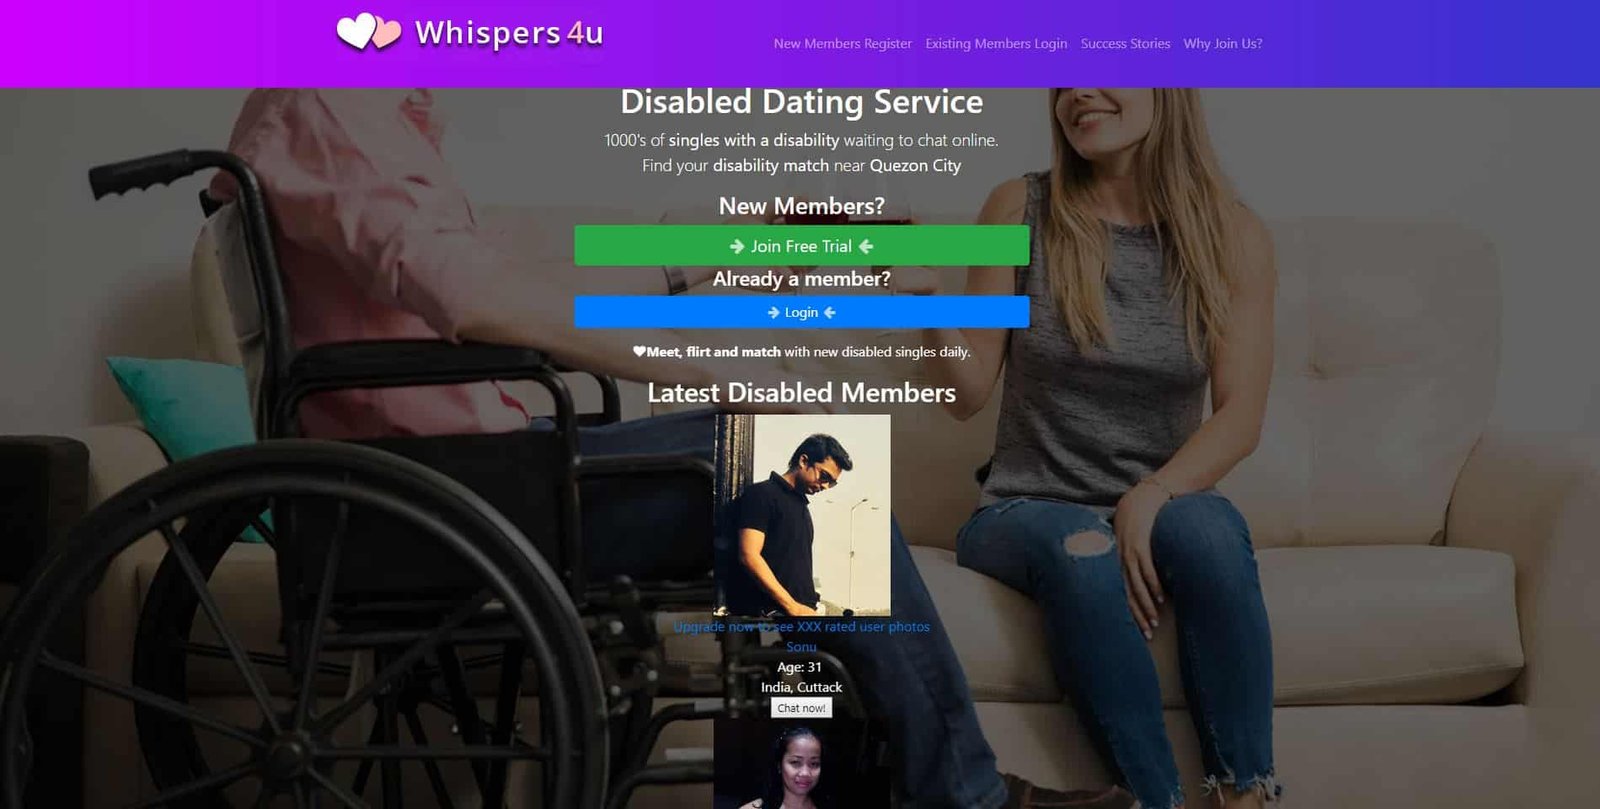 Disability dating sites: how to write the best online dating profile